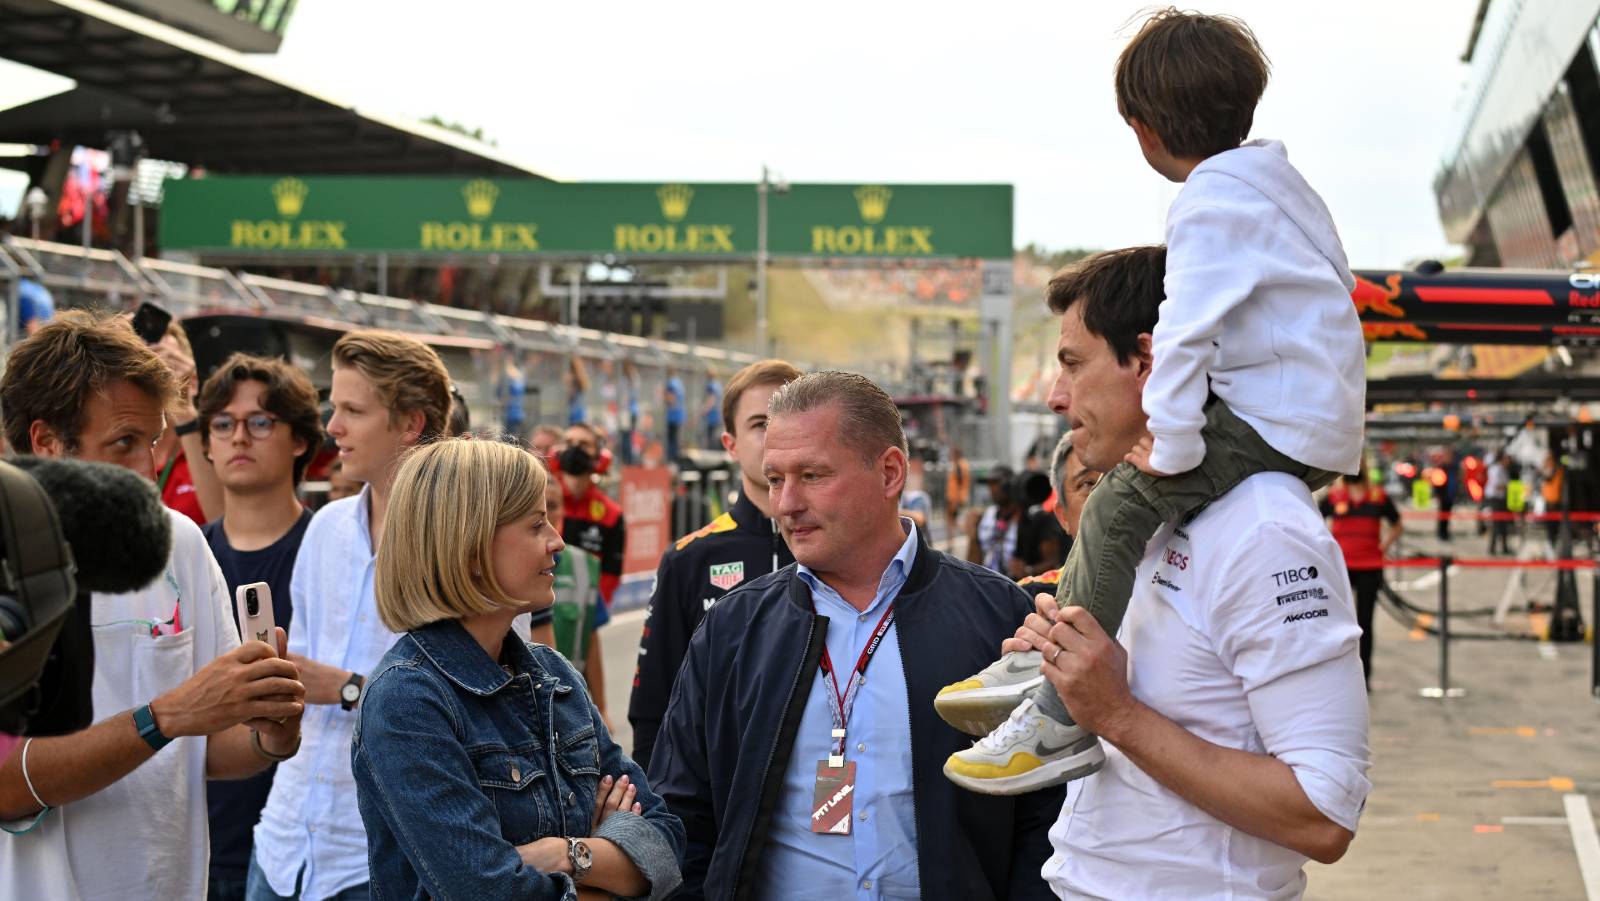 Jos Verstappen talking to Susie Wolff and Toto Wolff. Red Bull Ring July 2022.